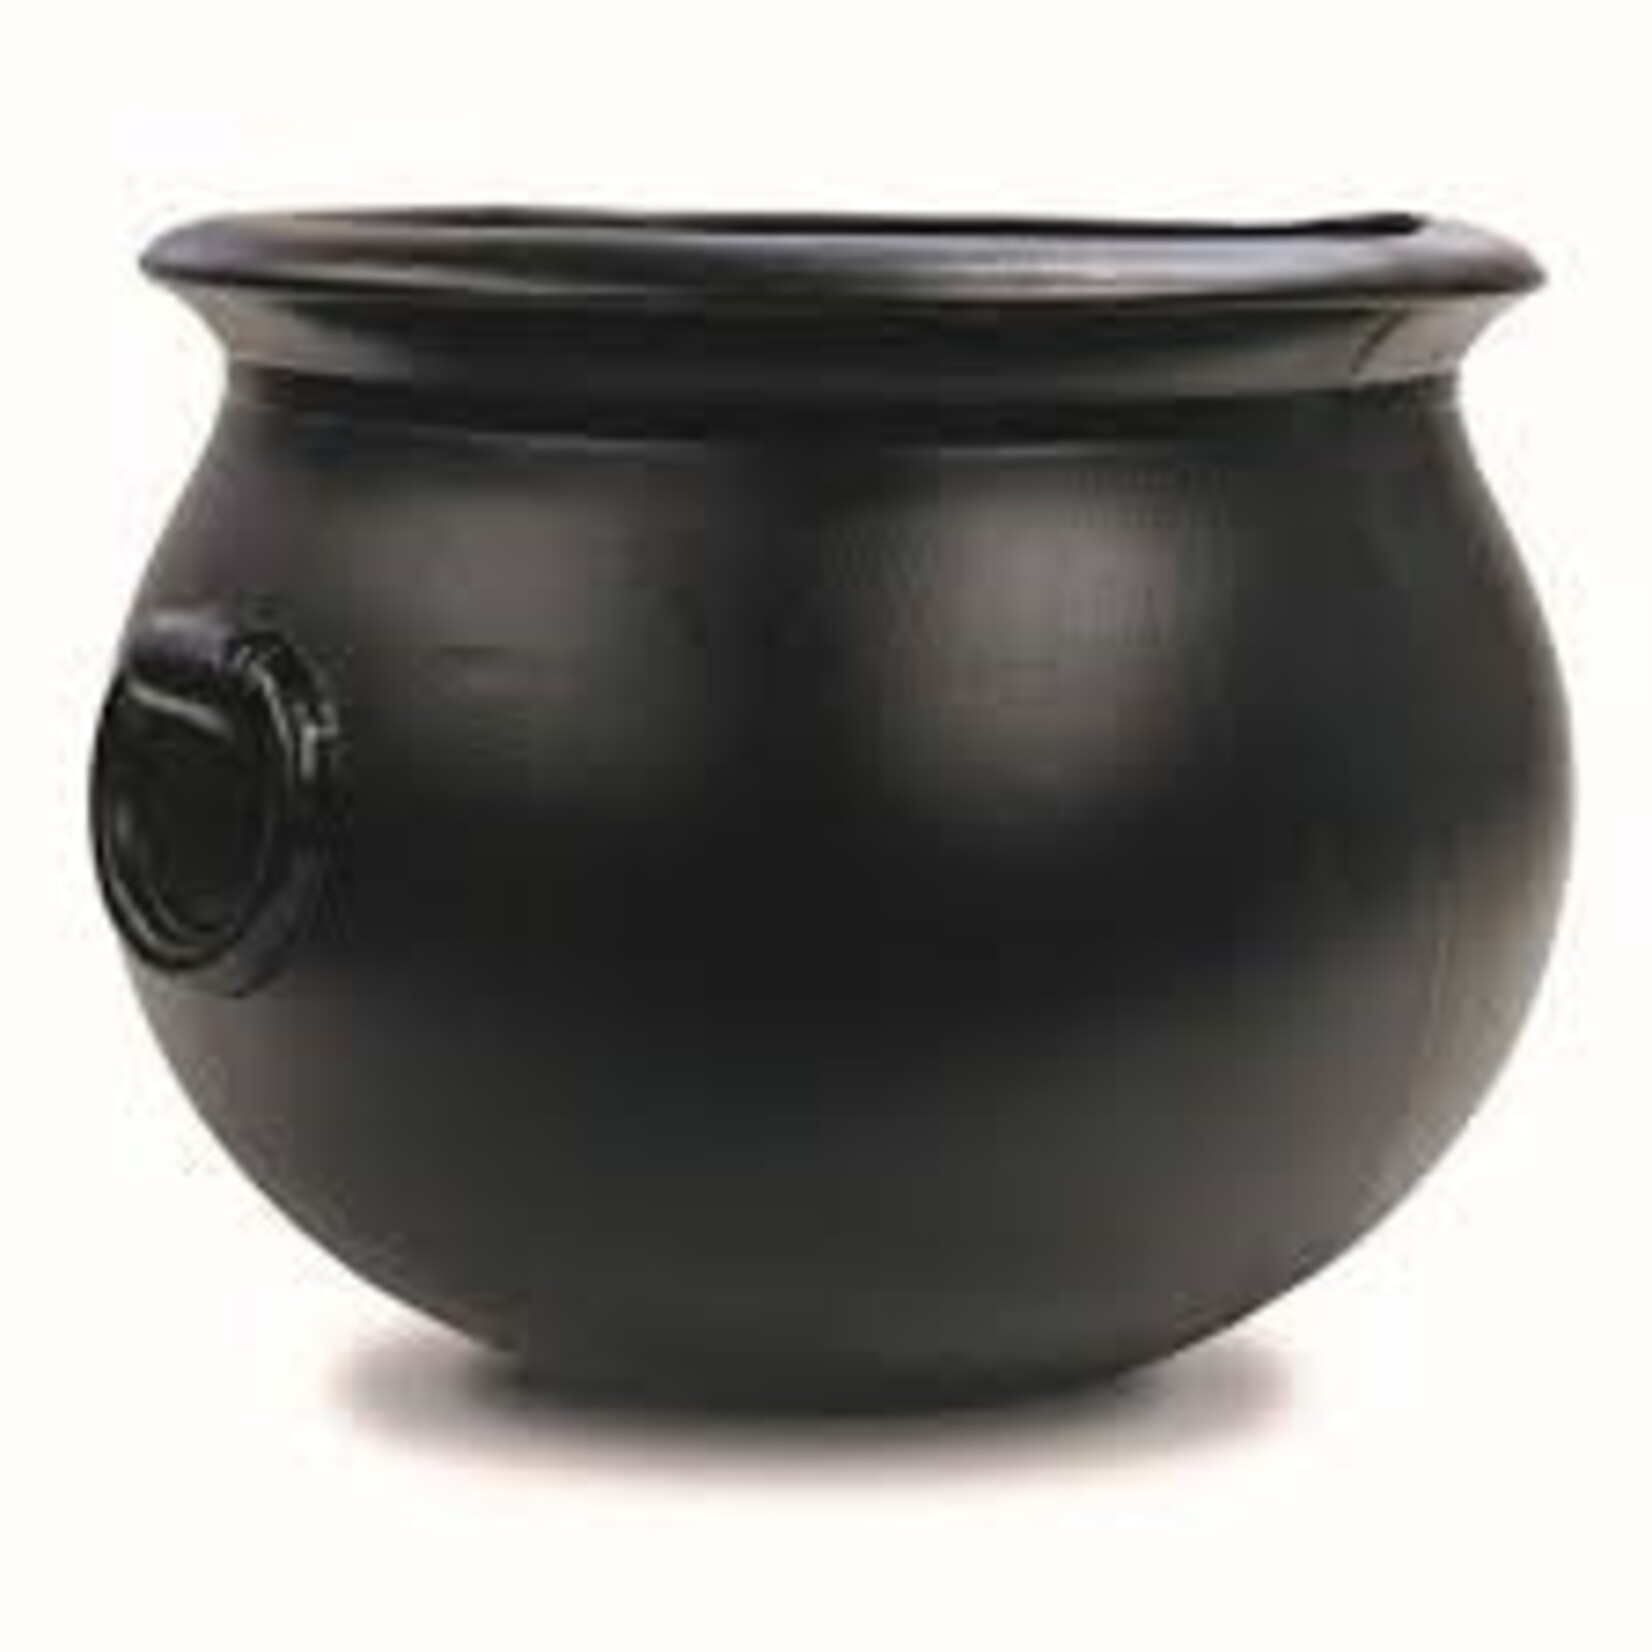 Blinky Products 18" Black Plastic Witches Cauldron - 1ct.